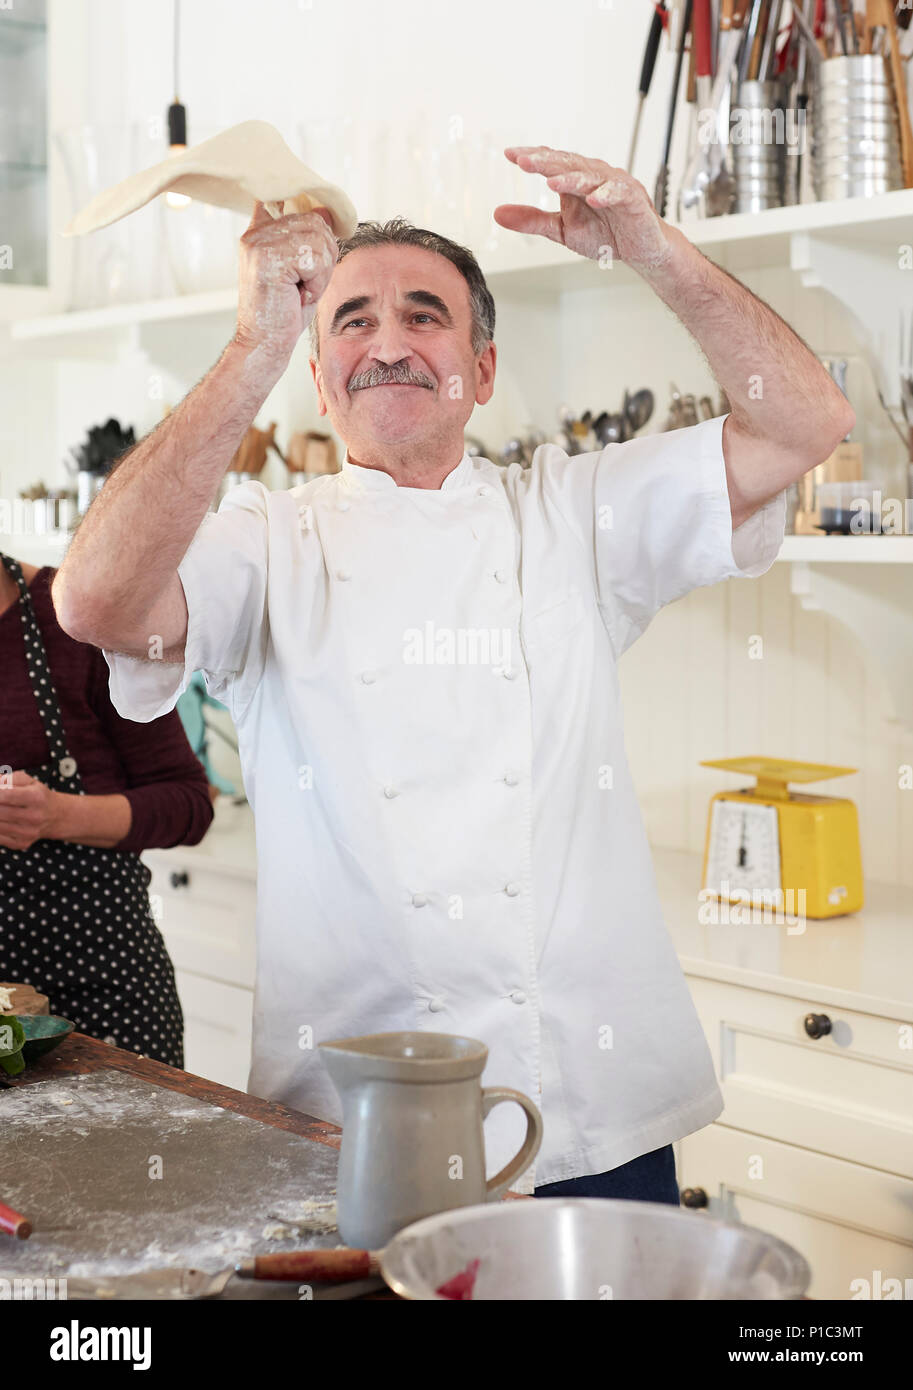 Playful senior chef tossing pizza dough in kitchen Stock Photo